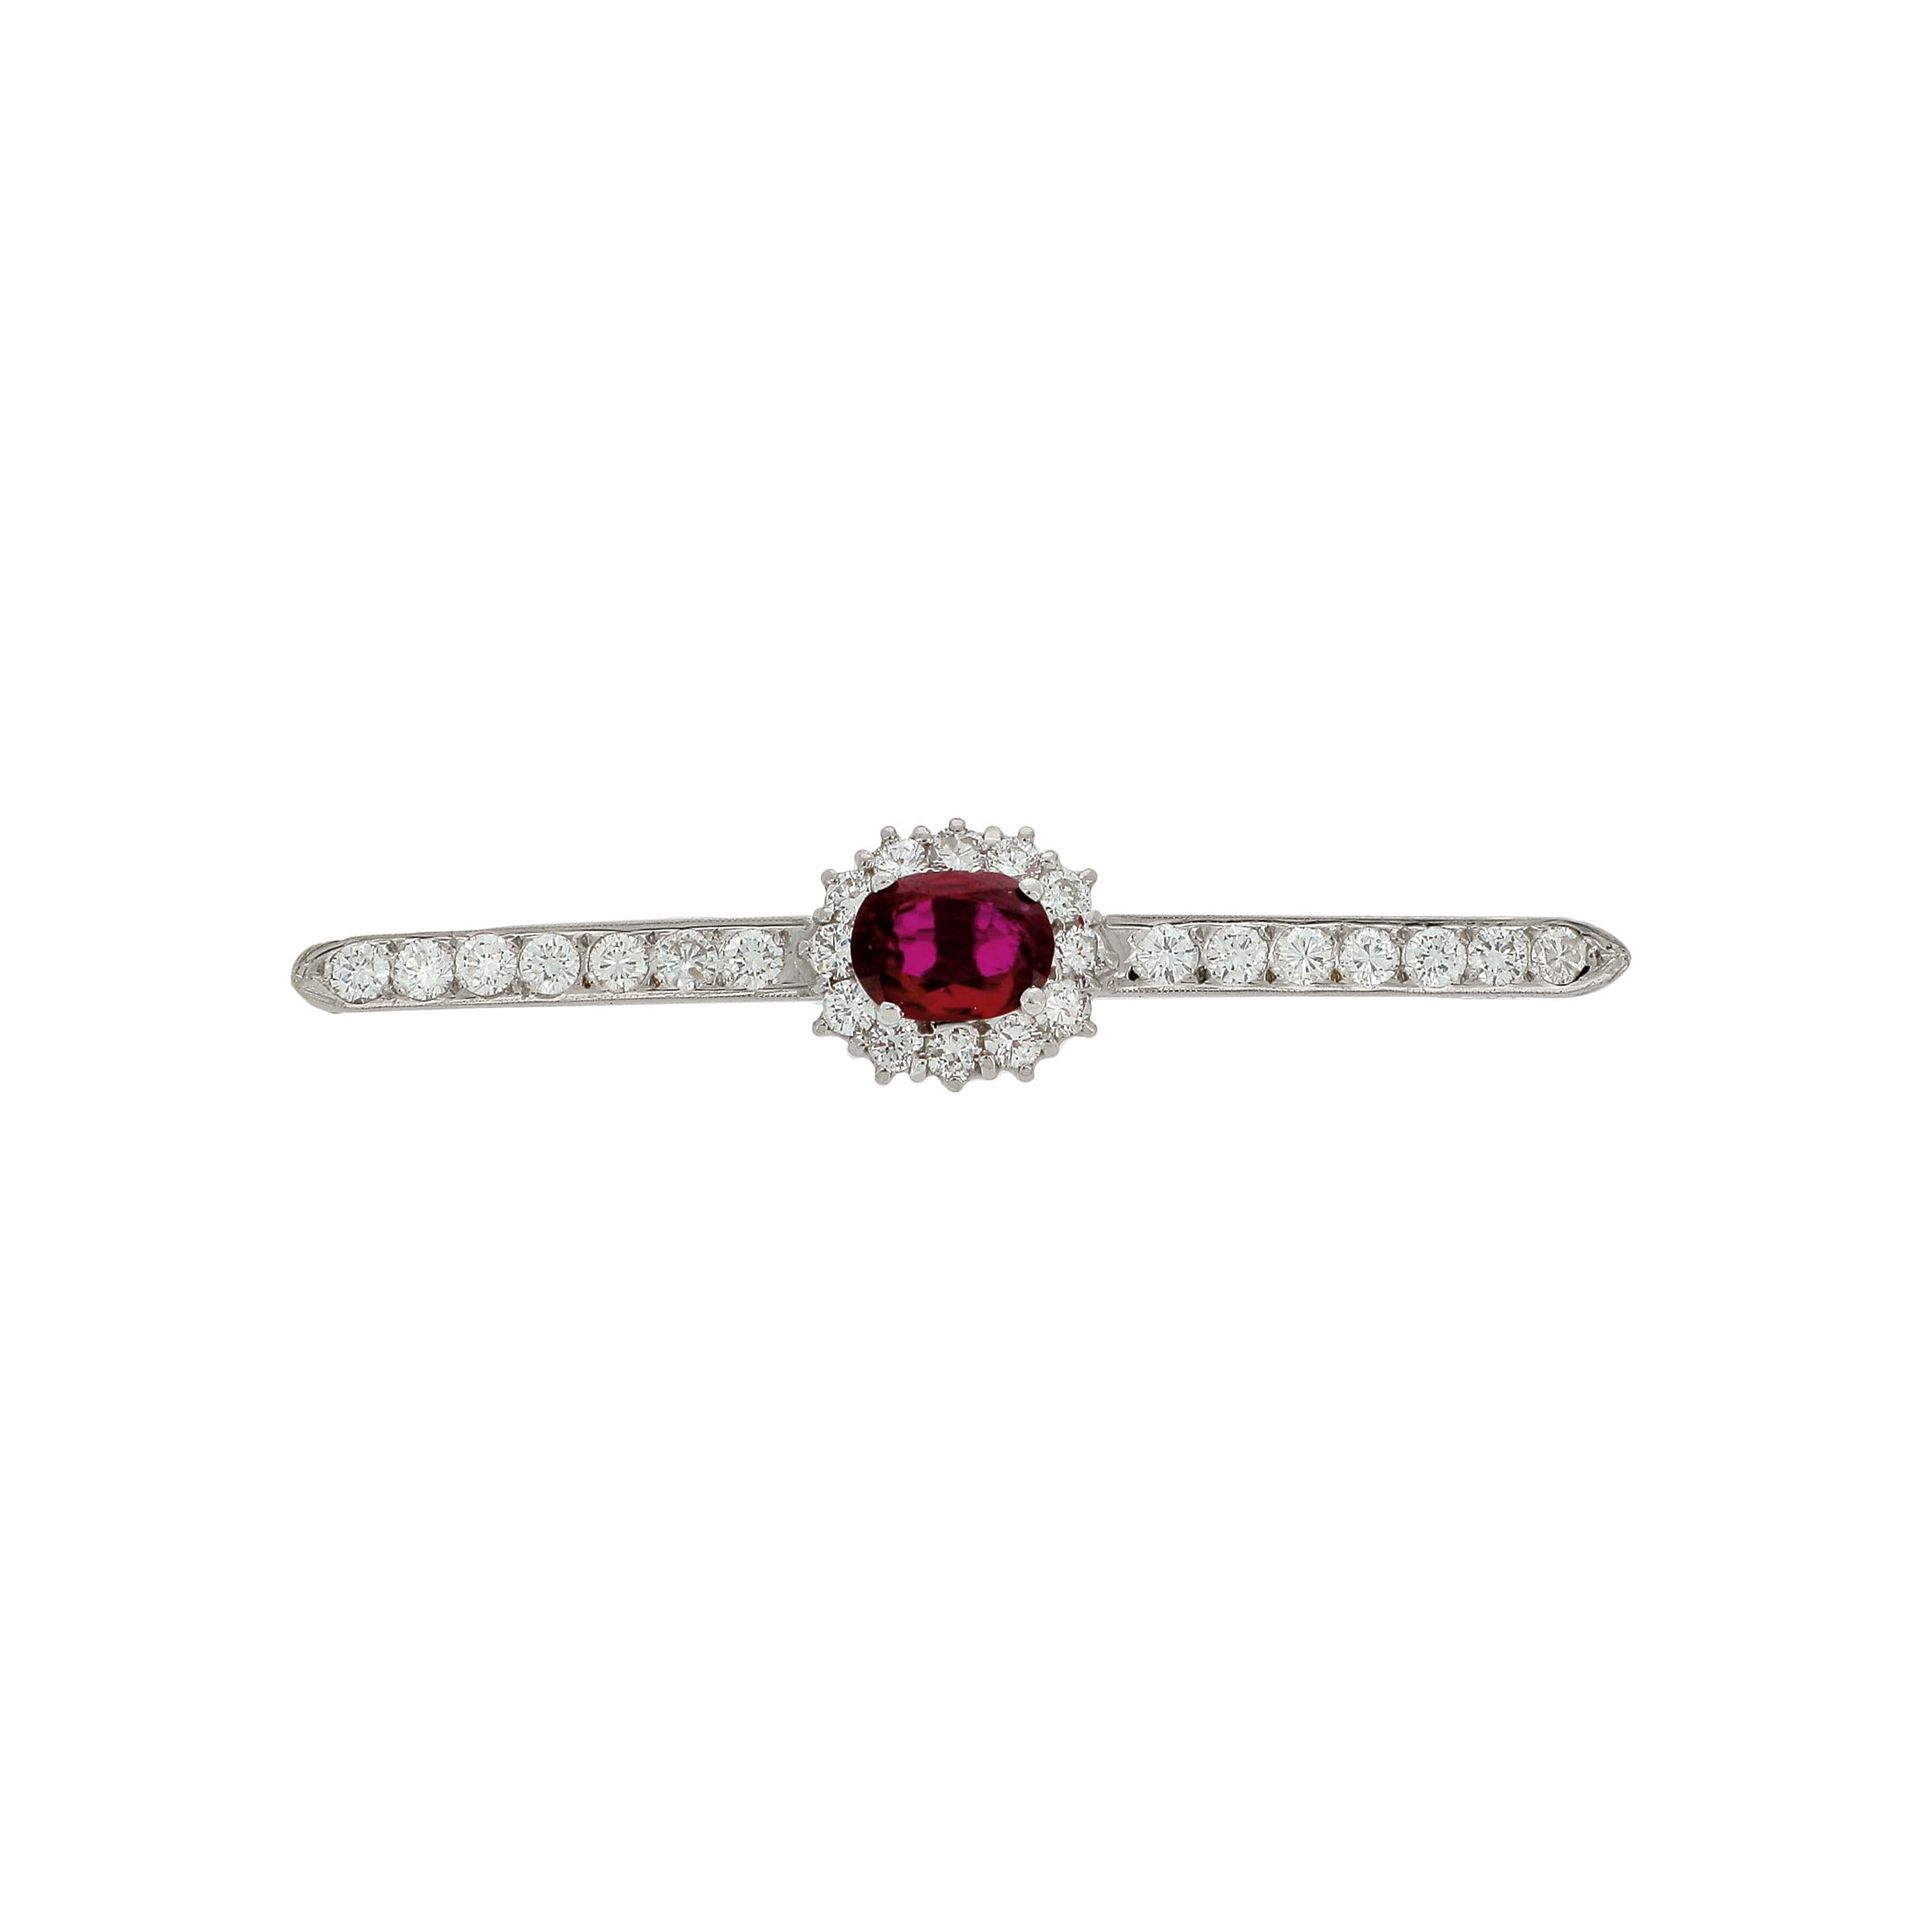 Null BARRETTE BROOCH

A diamond, ruby and platinum brooch. 

A diamond, ruby and&hellip;